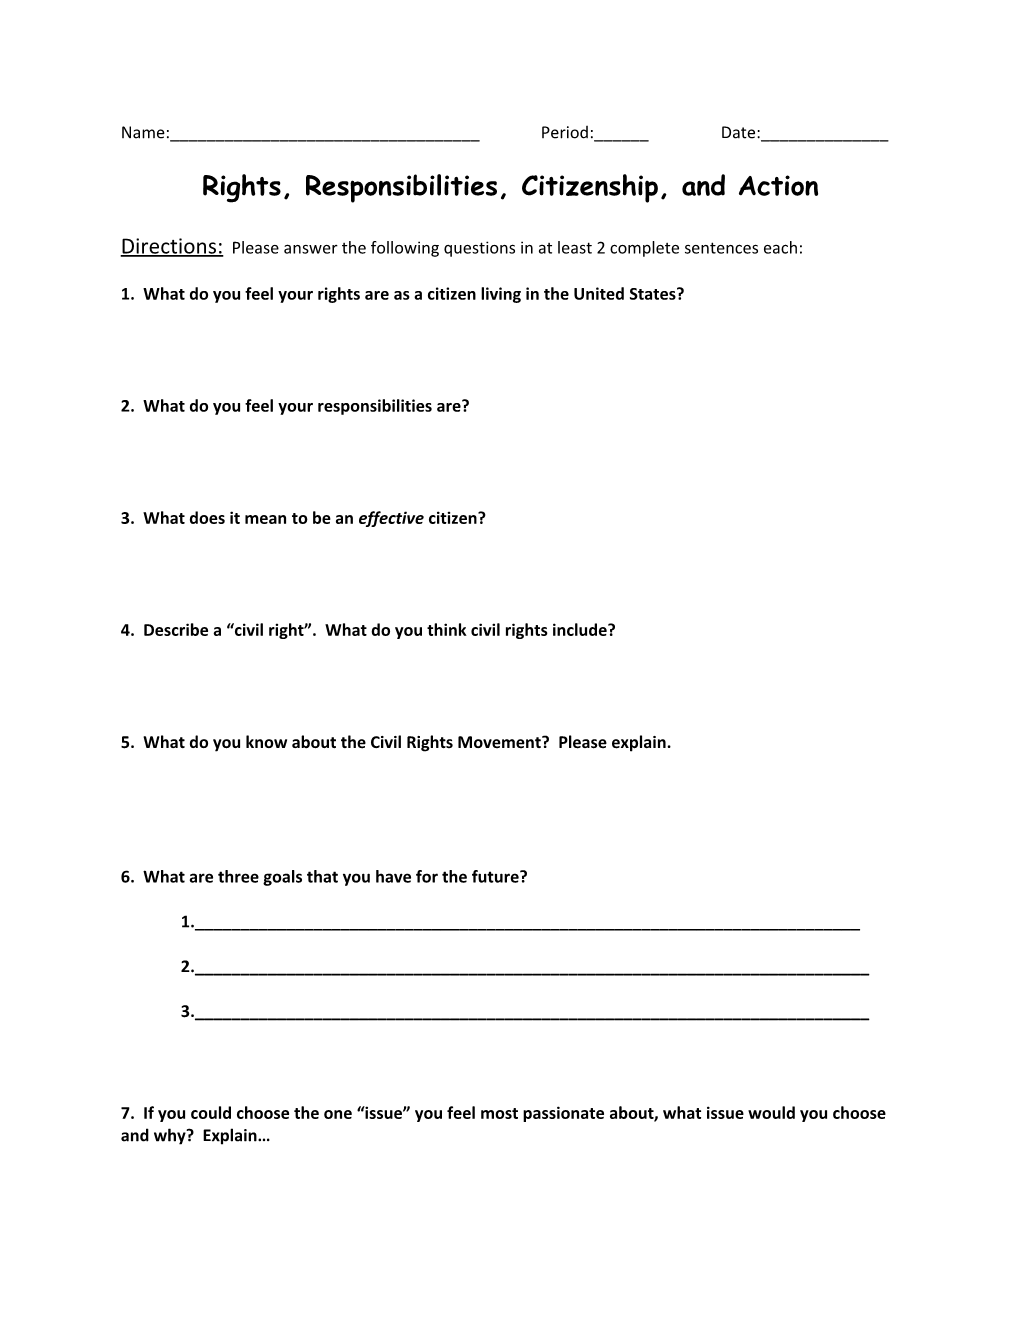 Rights, Responsibilities, Citizenship, and Action